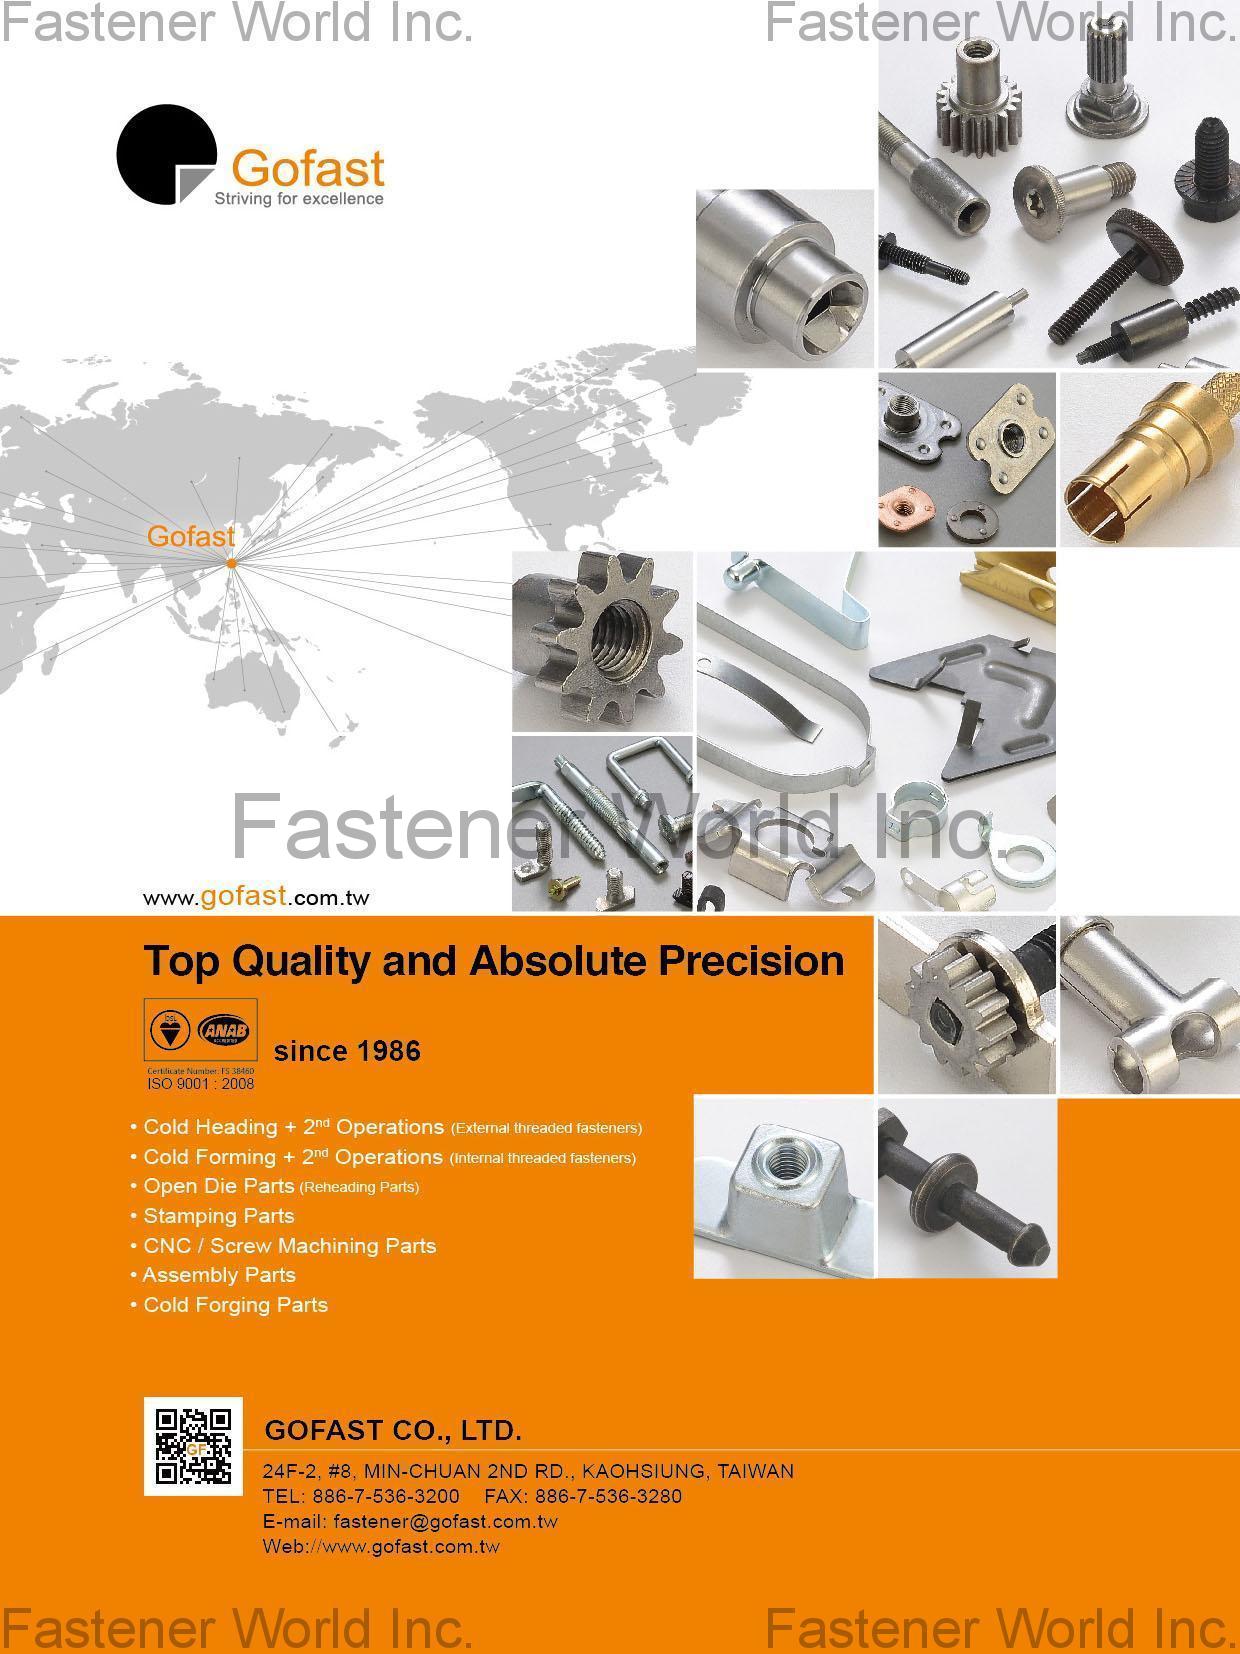 GOFAST CO., LTD.  , Cold Heading & 2nd Operations, Cold Forming & 2nd Operations, Open Die Parts, Stamping Parts, CNC/Screw Machining Parts, Assembly Parts, Licensee Parts , Open Die Screw